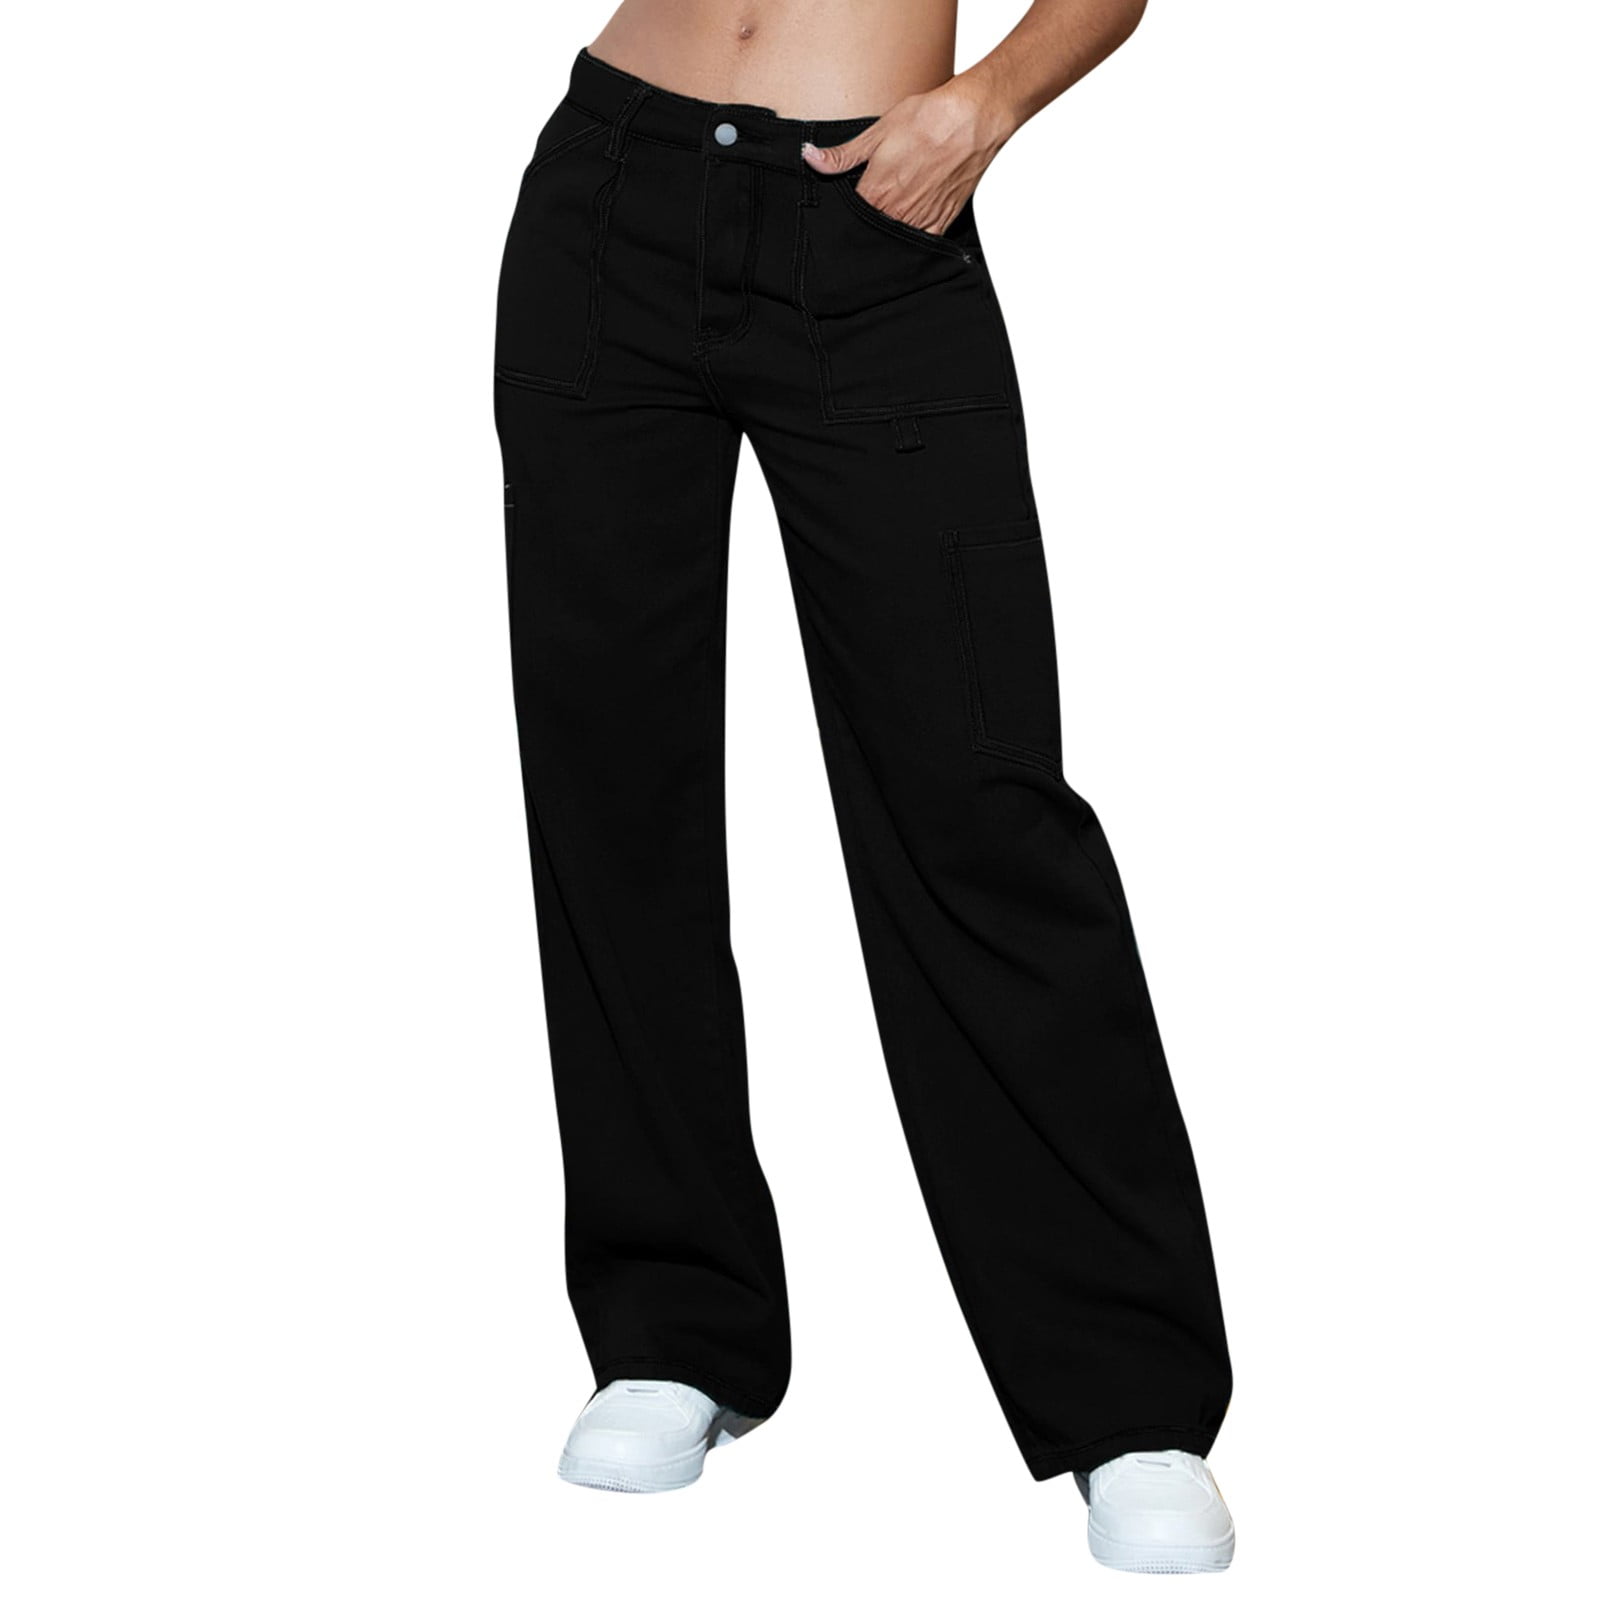 Booker 2023 Cargo Pants Woman Relaxed Fit Baggy Clothes Black